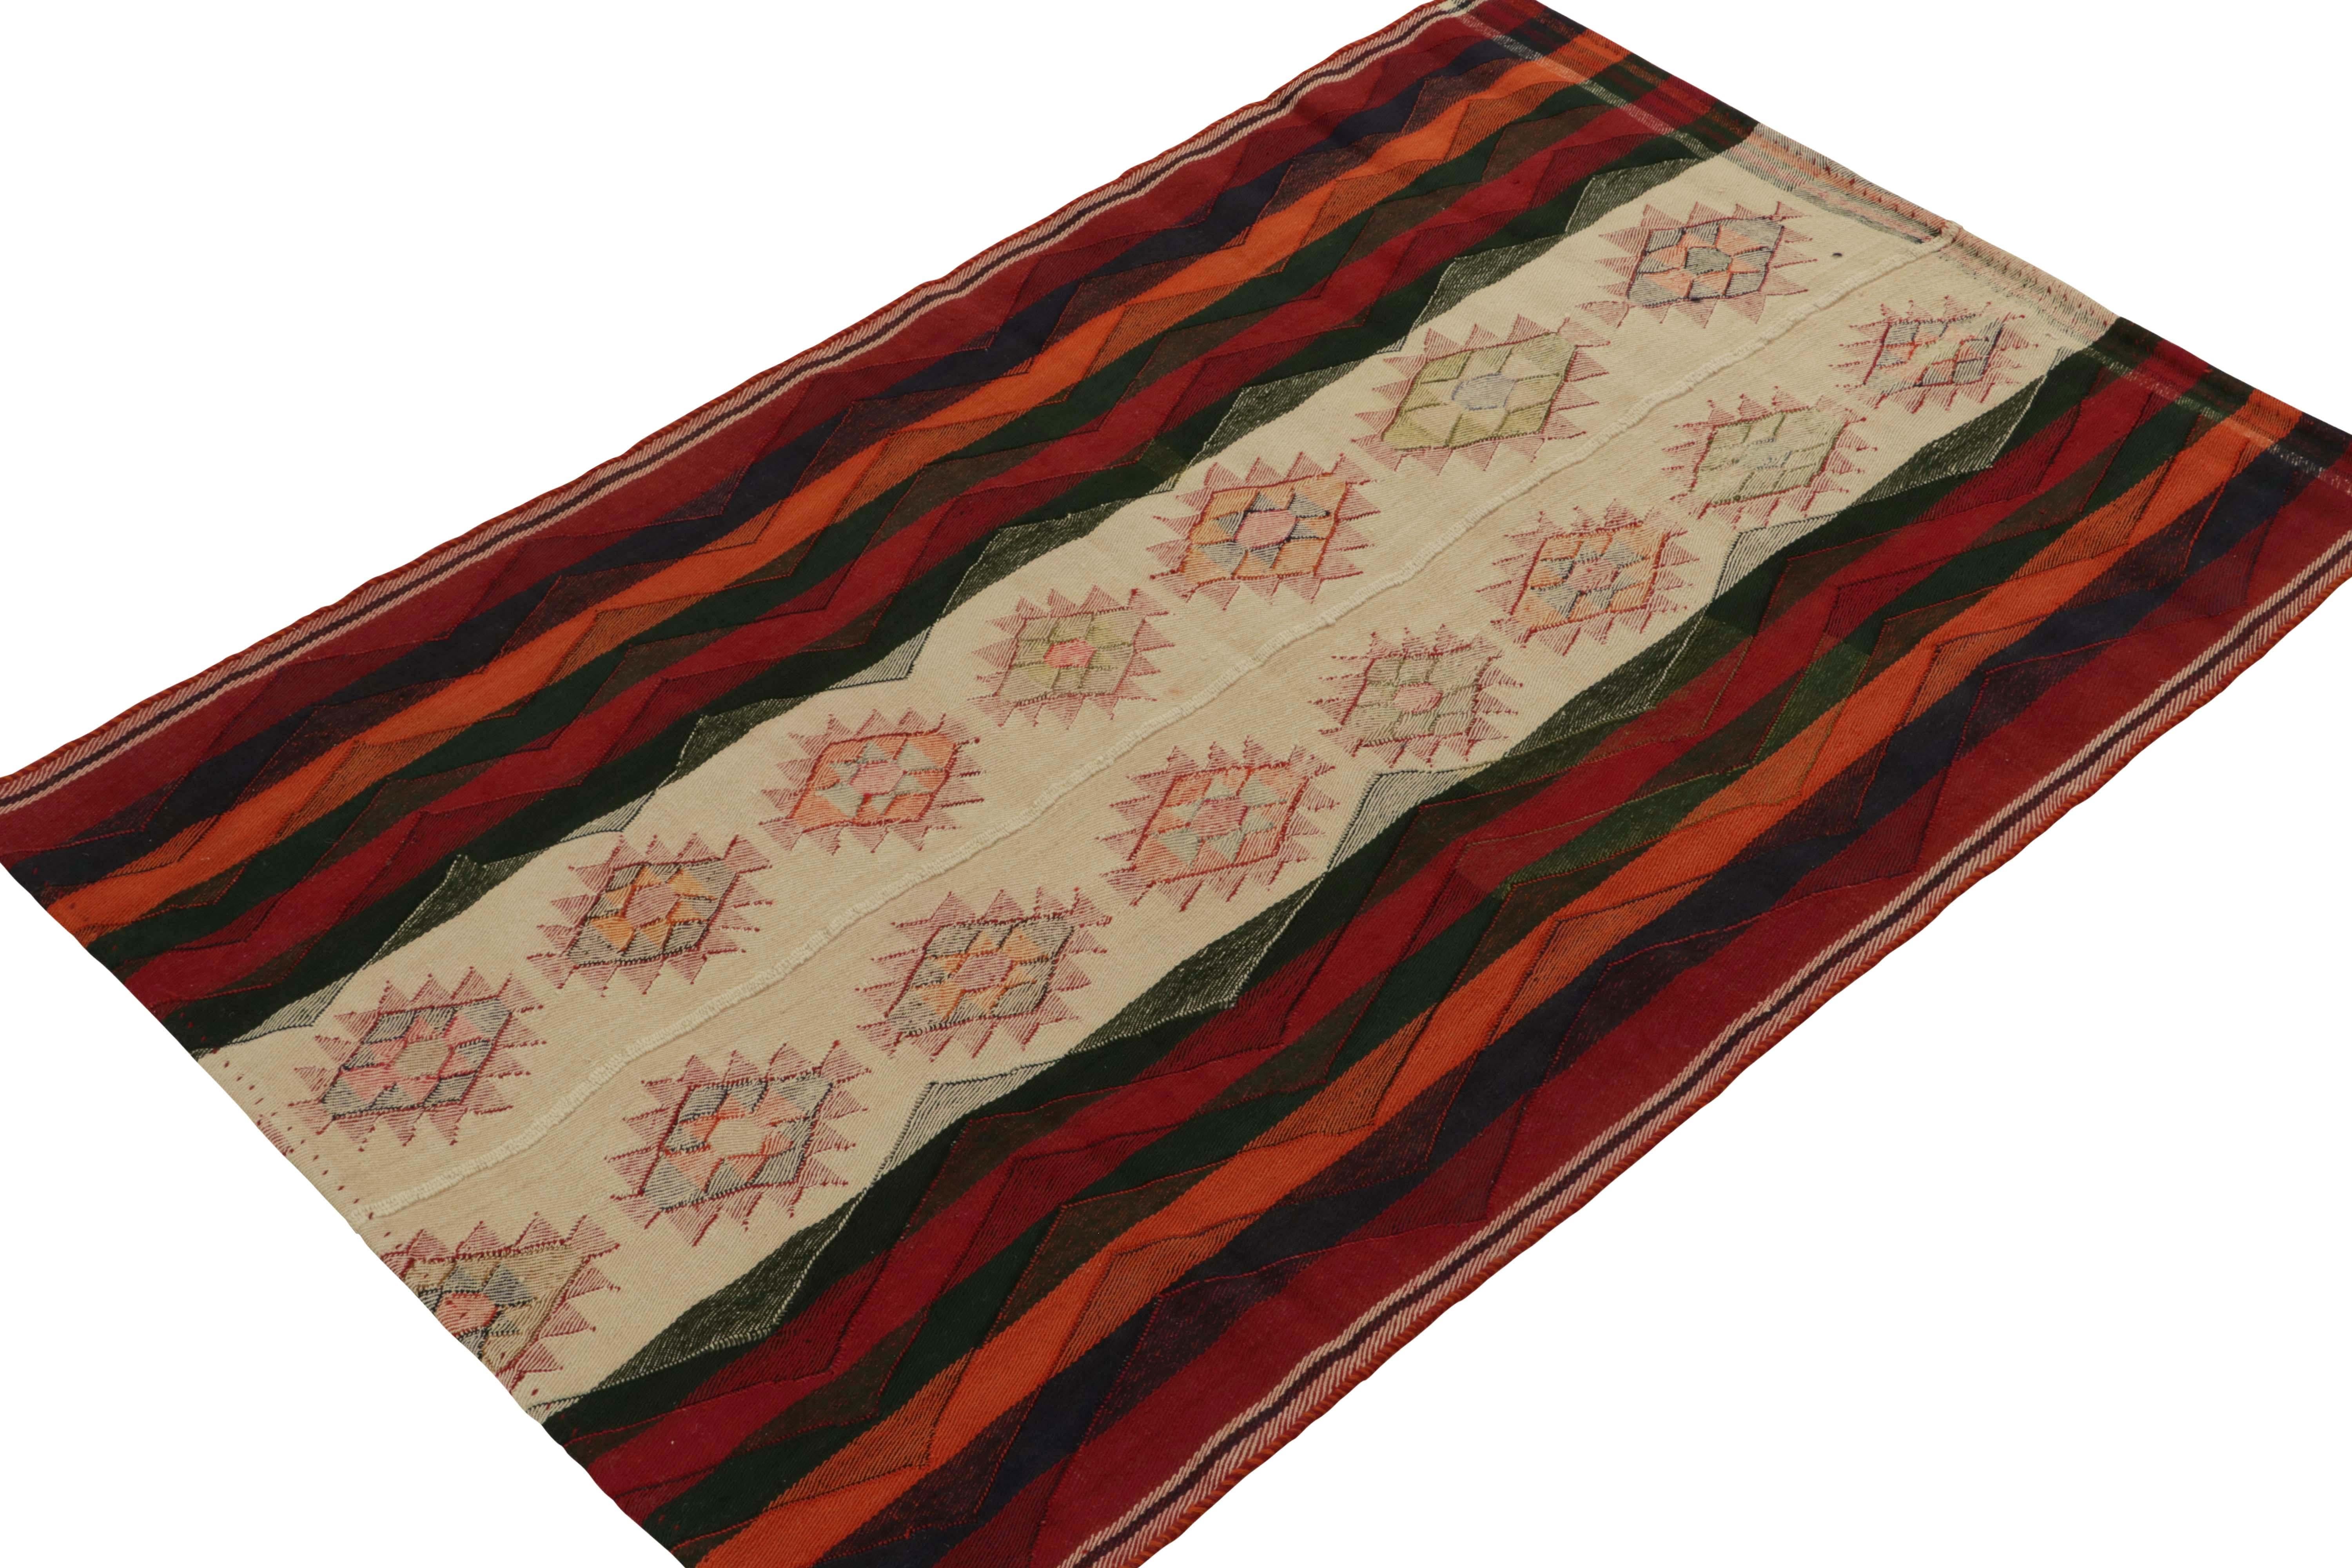 An extremely collectible vintage Persian Kilim of Qashqai provenance, handwoven in wool circa 1950-1960. 

This tribal rug enjoys an uncommon marriage of nomadic elements—including a narrow field in brighter colors between richer stripes. A beige